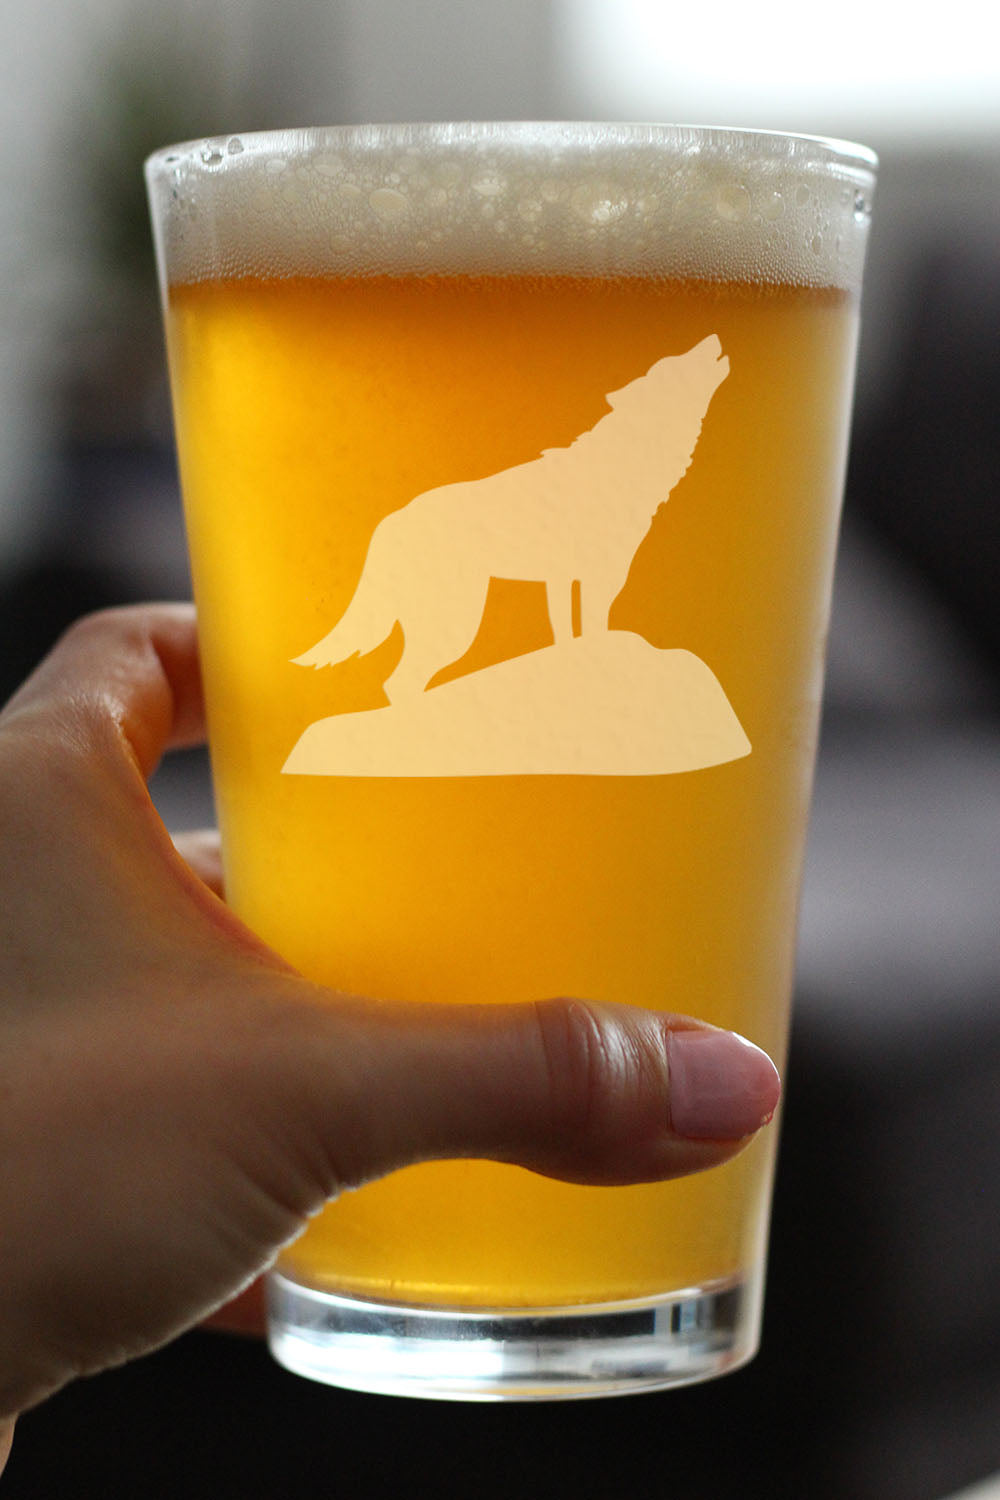 Wolf Pint Glass for Beer - Cabin Themed Gifts or Rustic Decor for Men and Women - Fun Drinking or Party Glasses - 16 oz